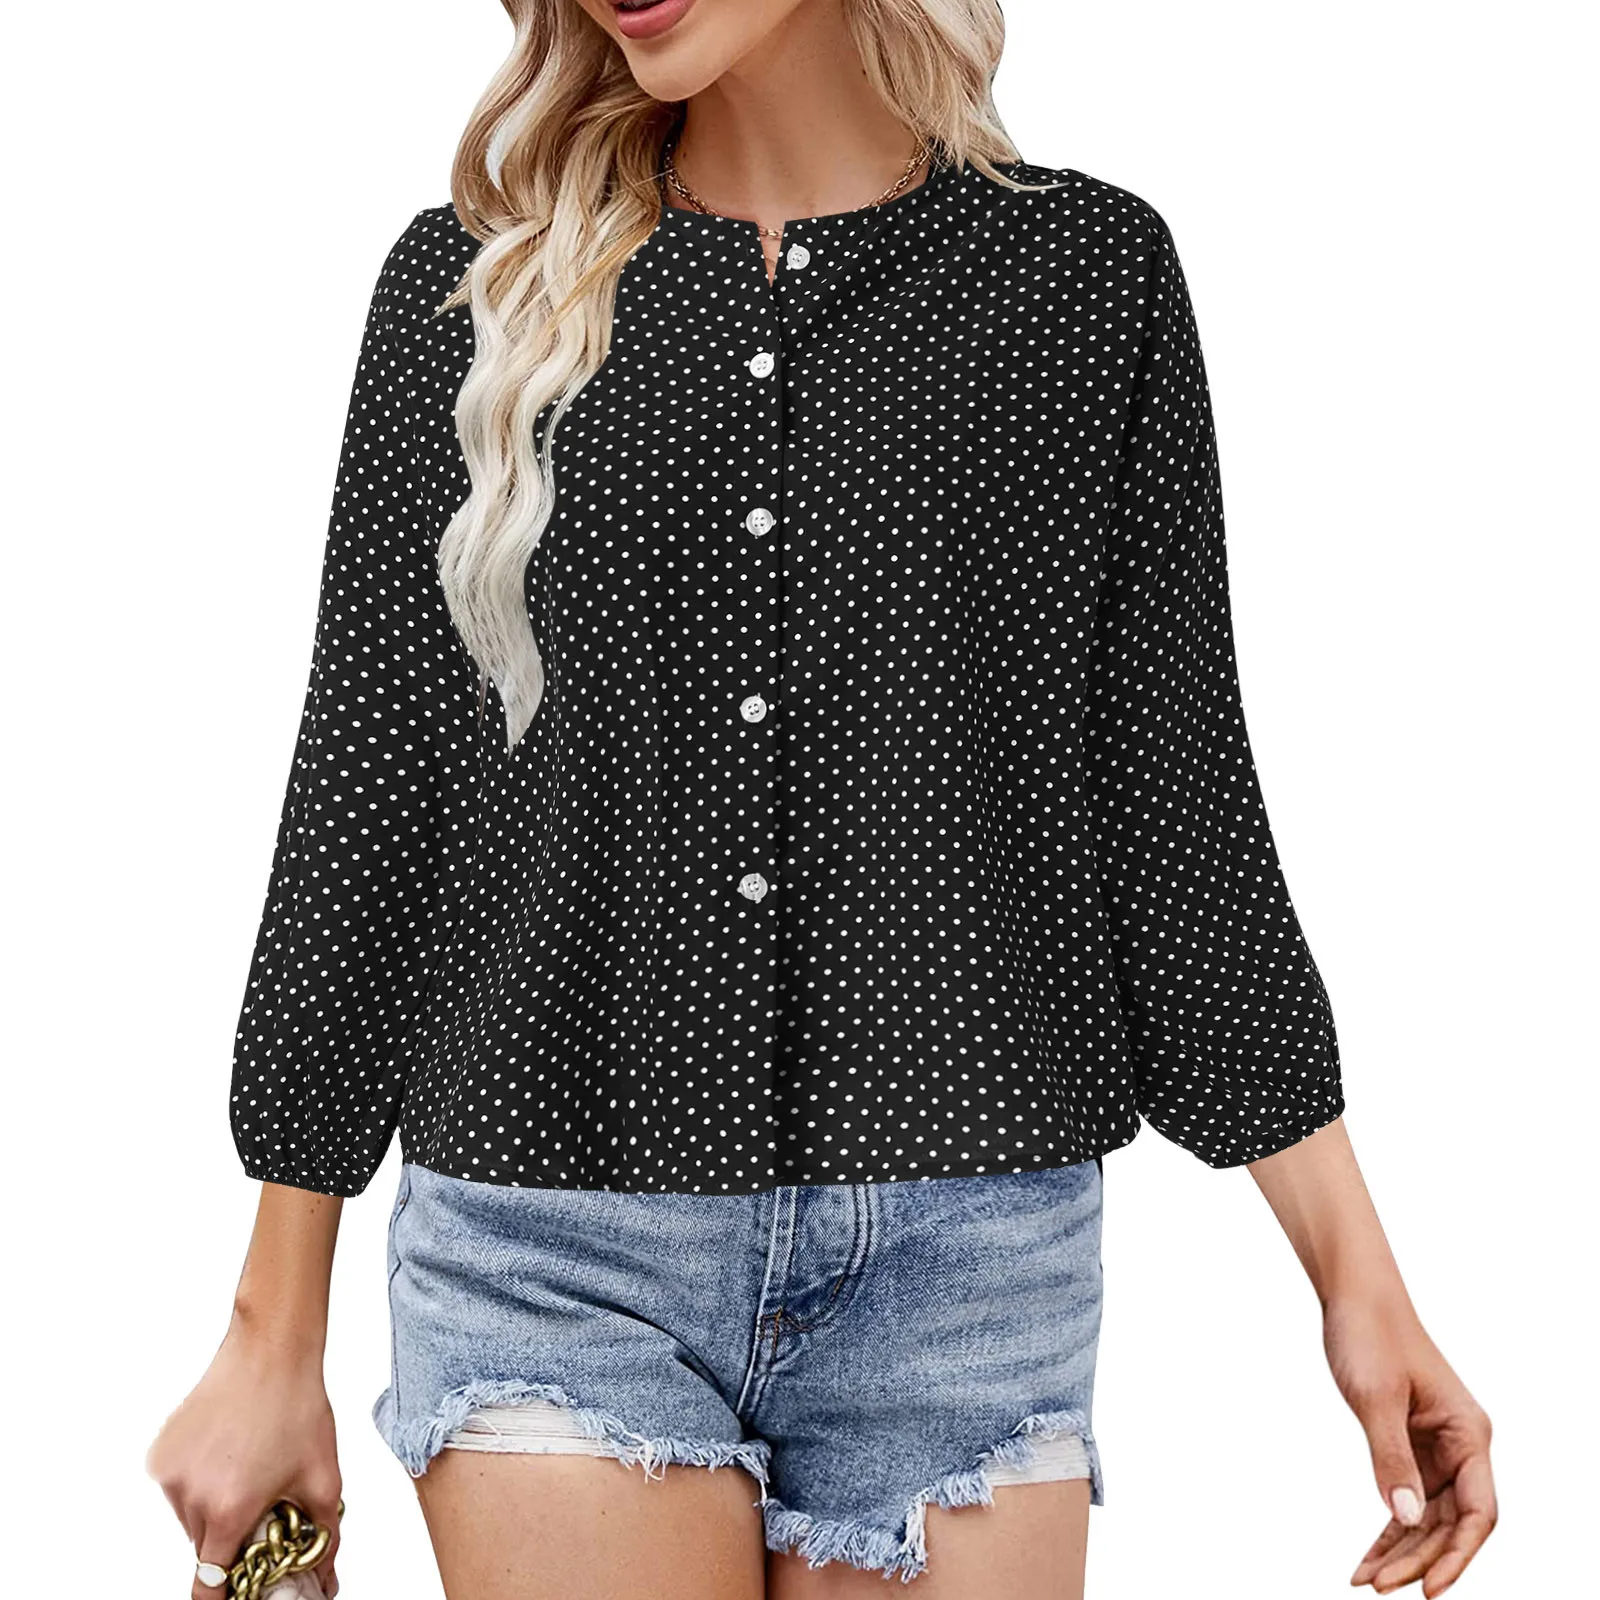 

Women Loose Button Blouses summer Polka Dot long Sleeve tops Shirt ladies vintage stand collar Pullover Retro camisas blusas